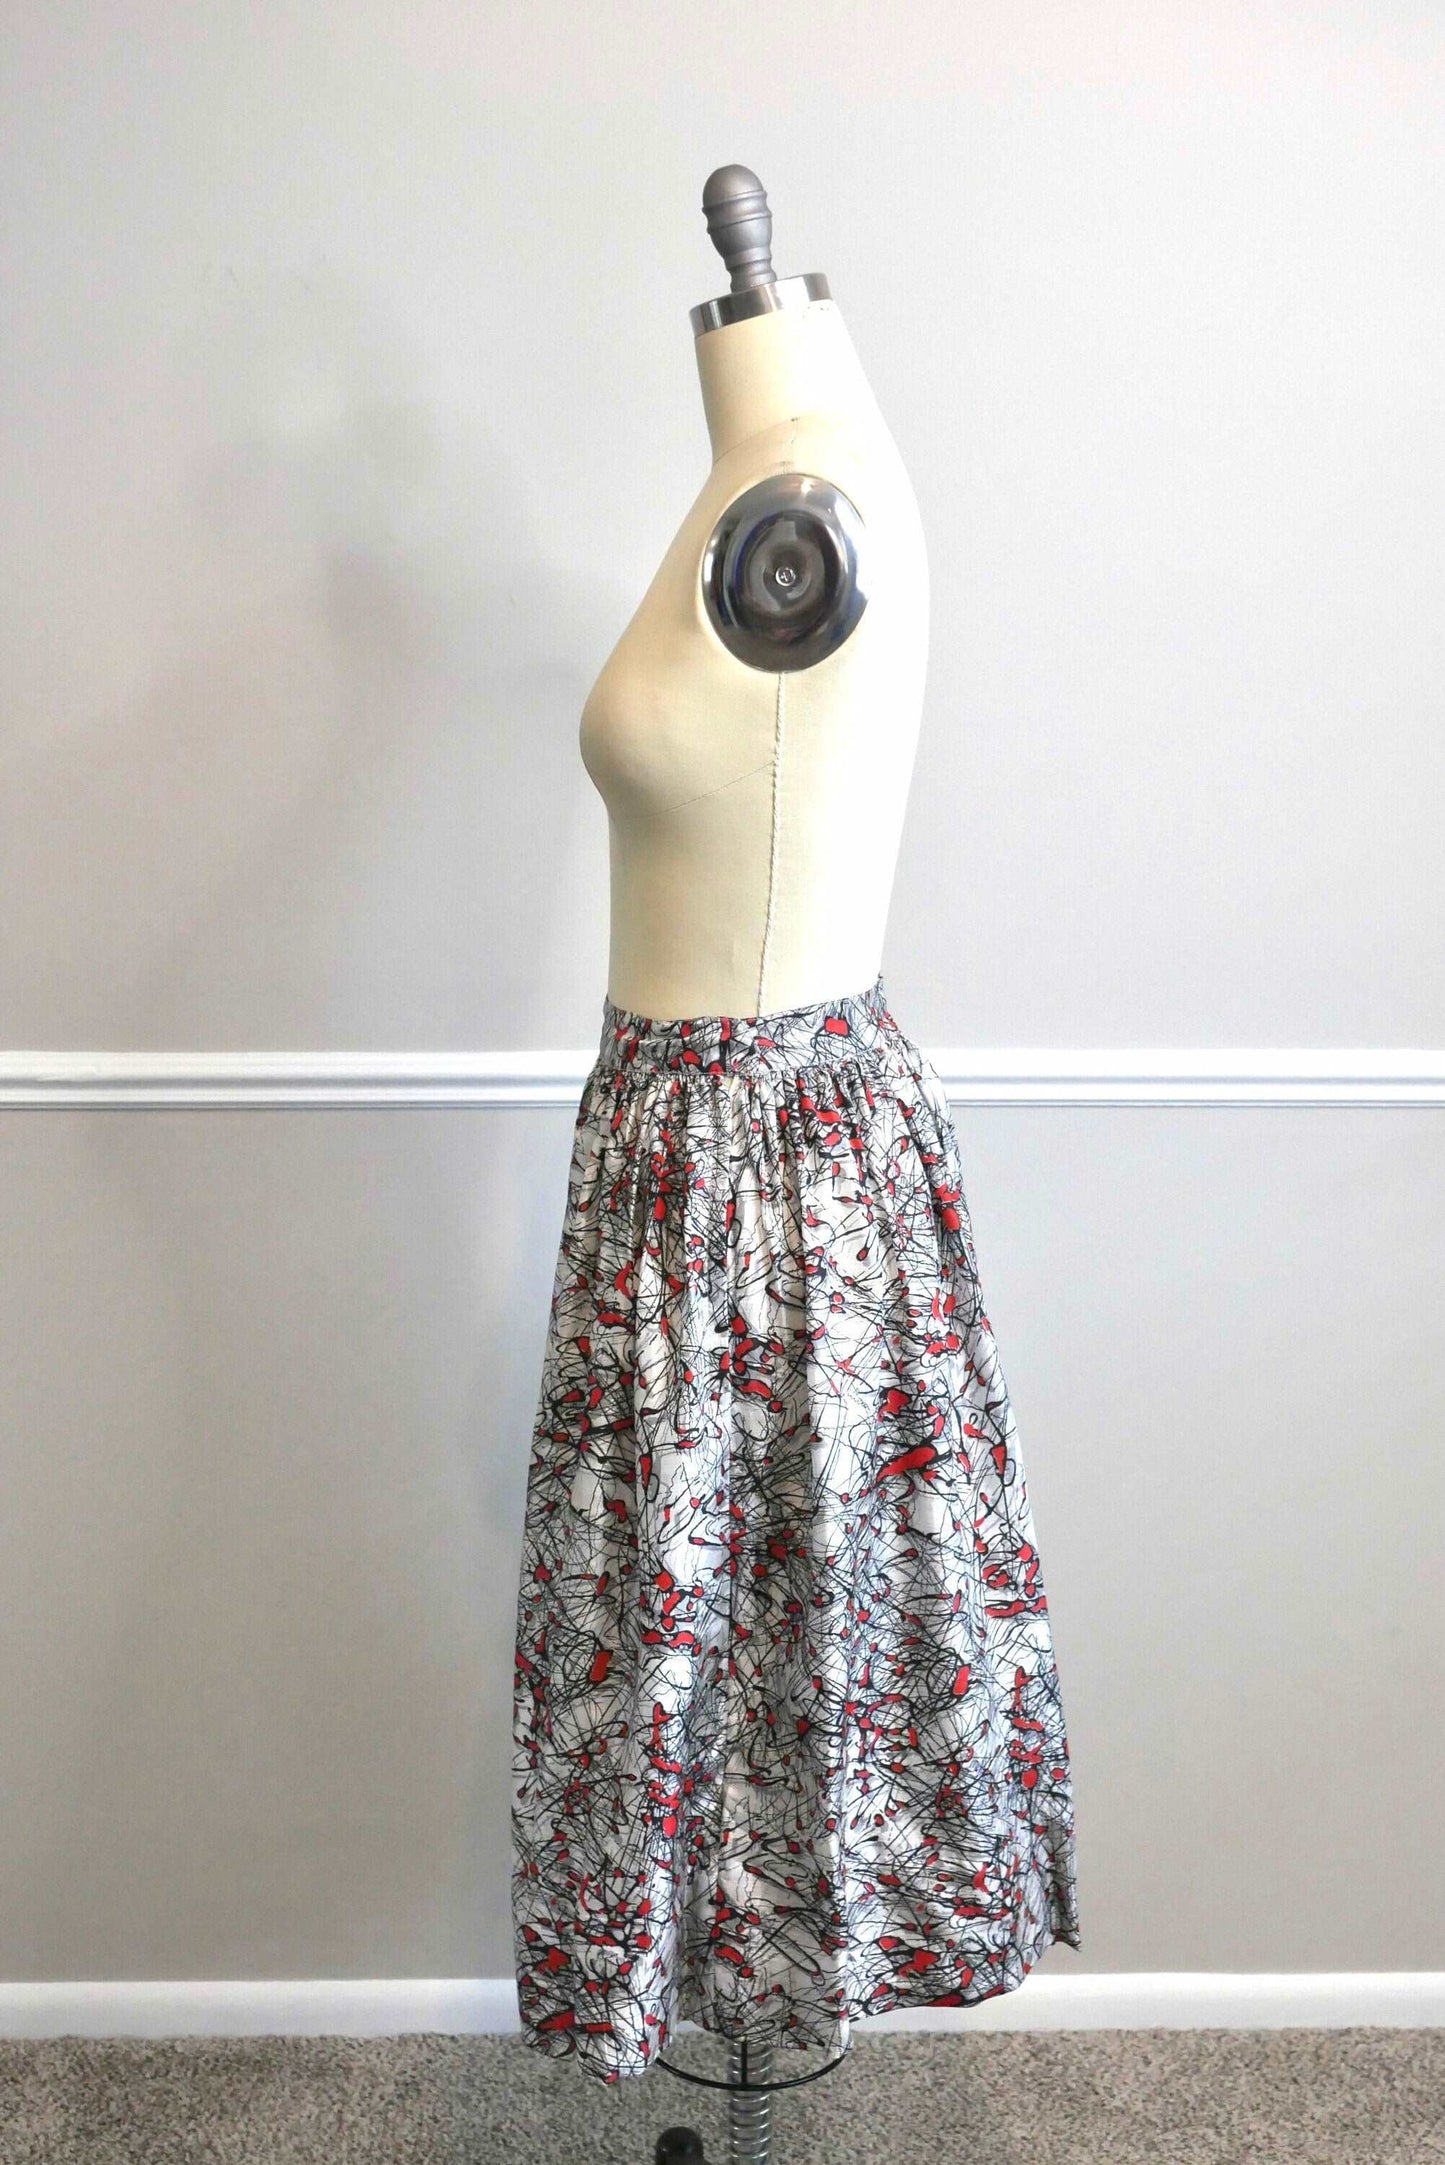 ON SALE Vintage 1950s Circle Skirt / 50s retro Jackson Pollock print Silver full skirt holiday party size XS S